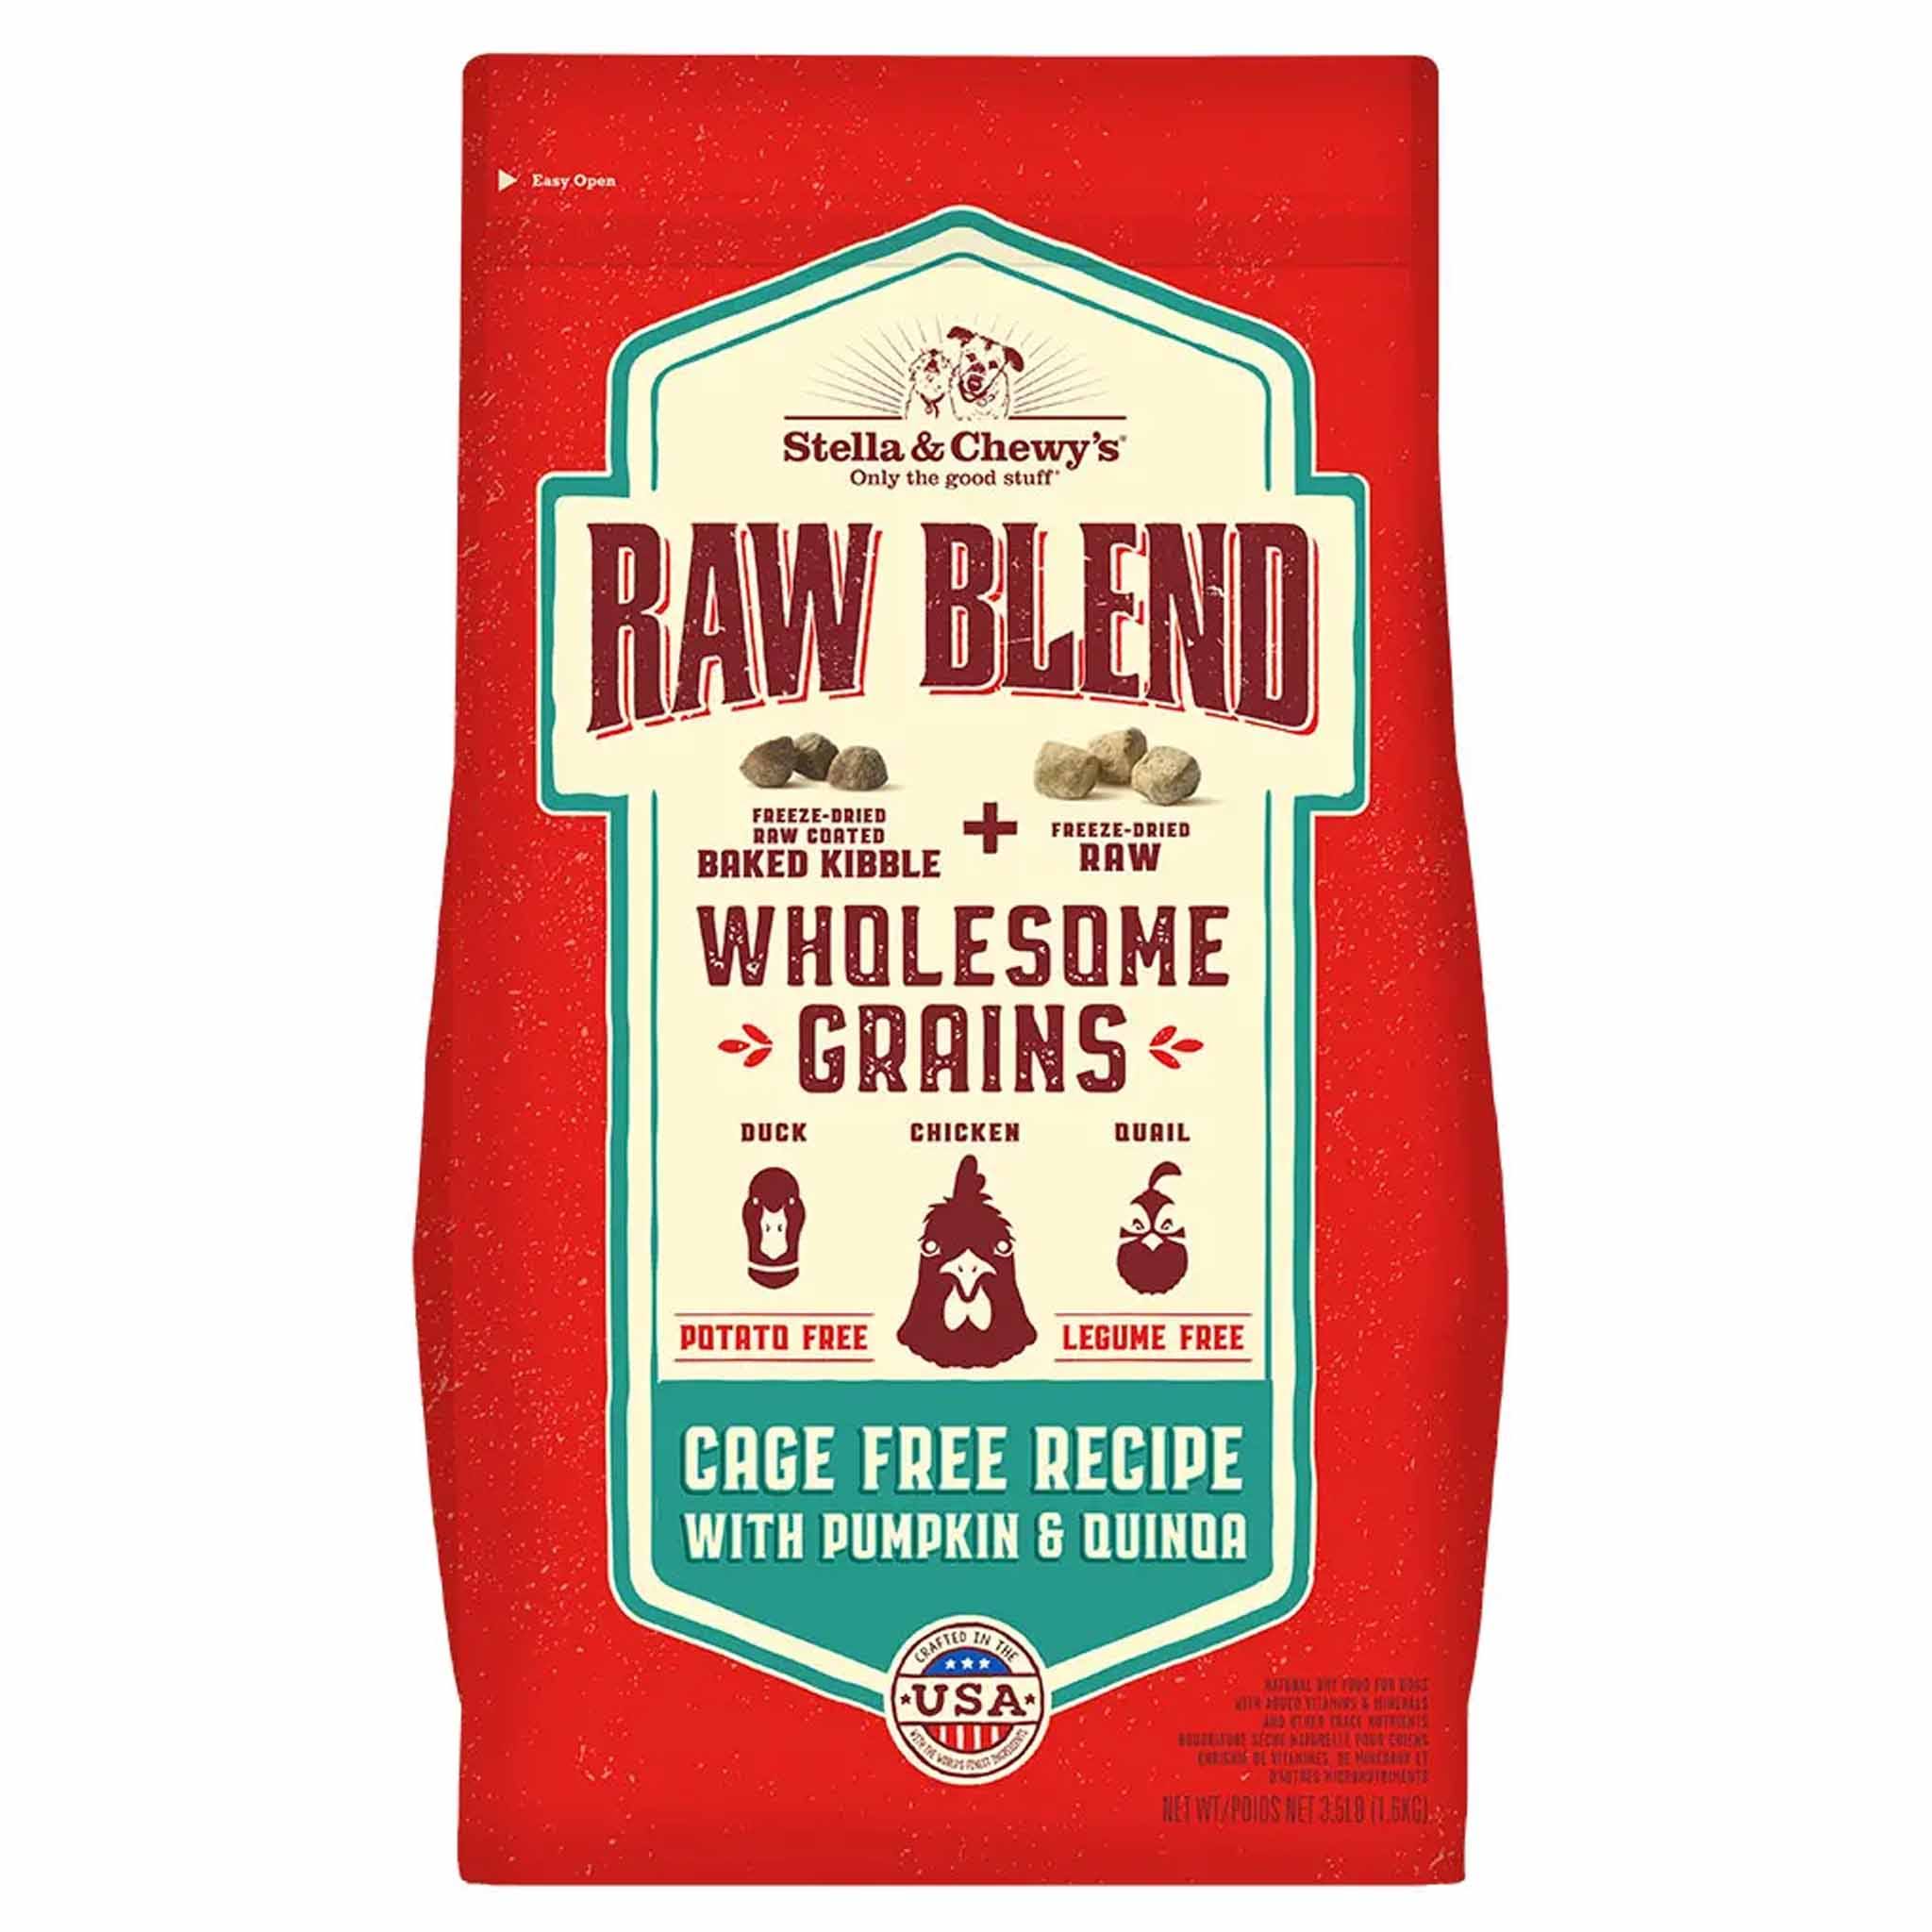 Stella & Chewy's Raw Blend Kibble with Wholesome Grains Cage Free Recipe Dry Dog Food 22 lbs